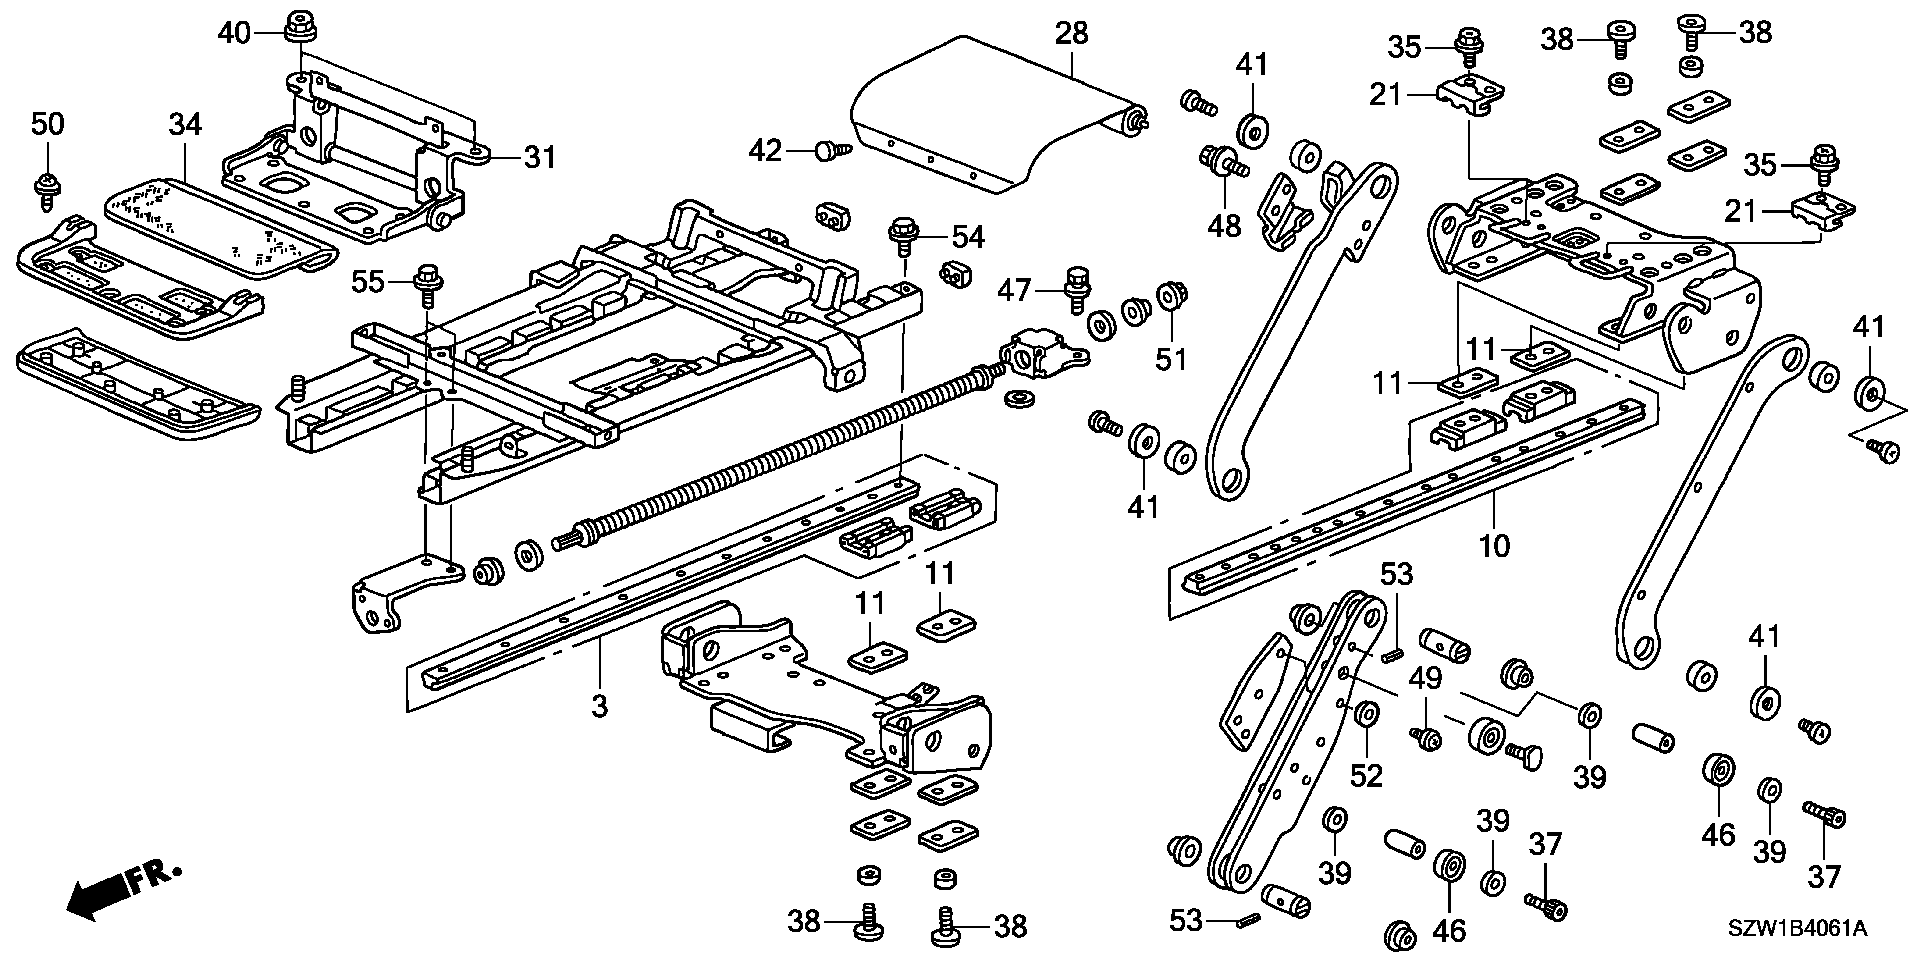 LIFTER  COMPONENT PARTS (1) ( SIDE LIFT UP SEAT)